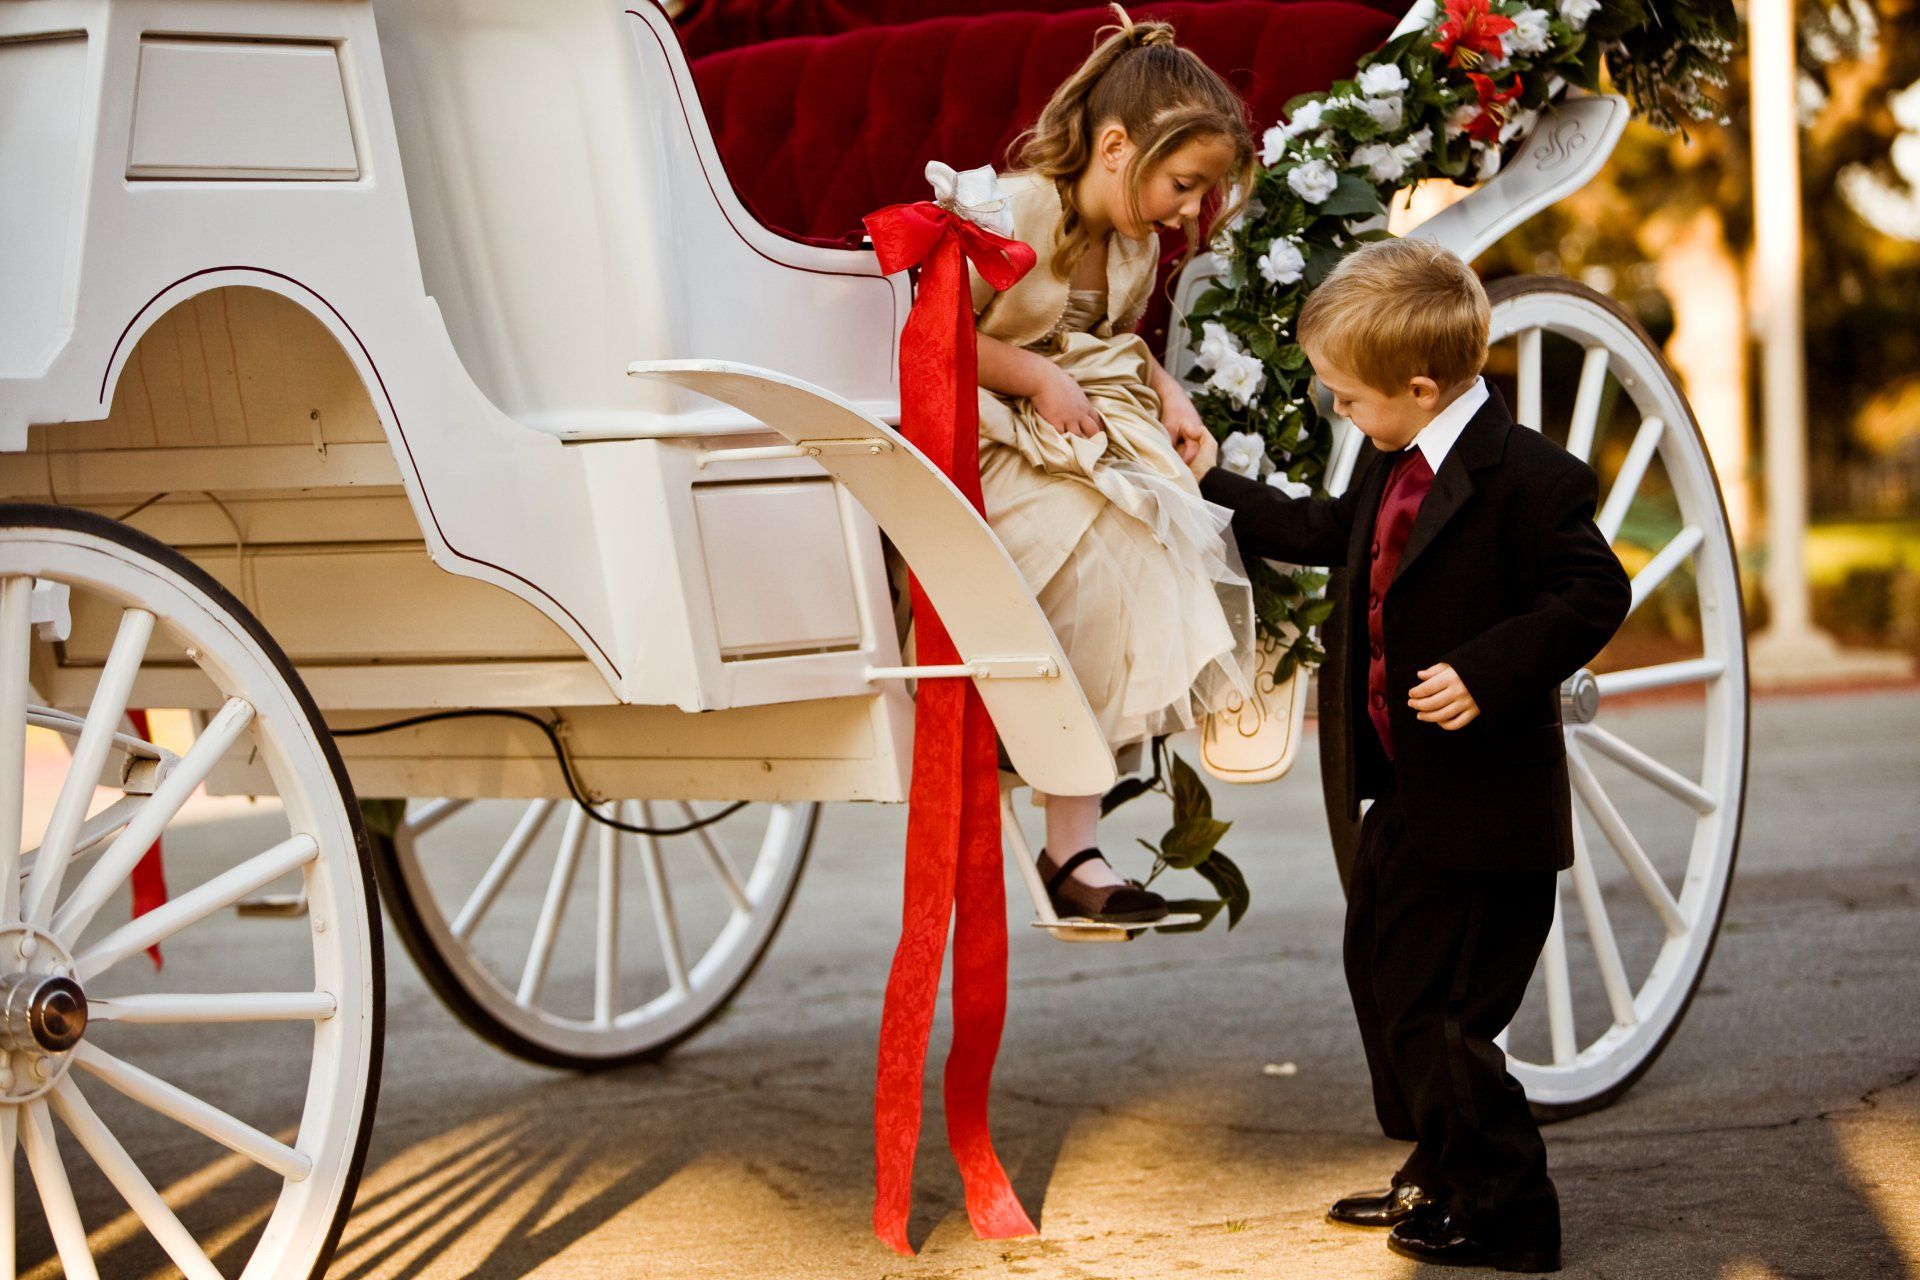 ring bearer helping flower girl from wedding horse carriage